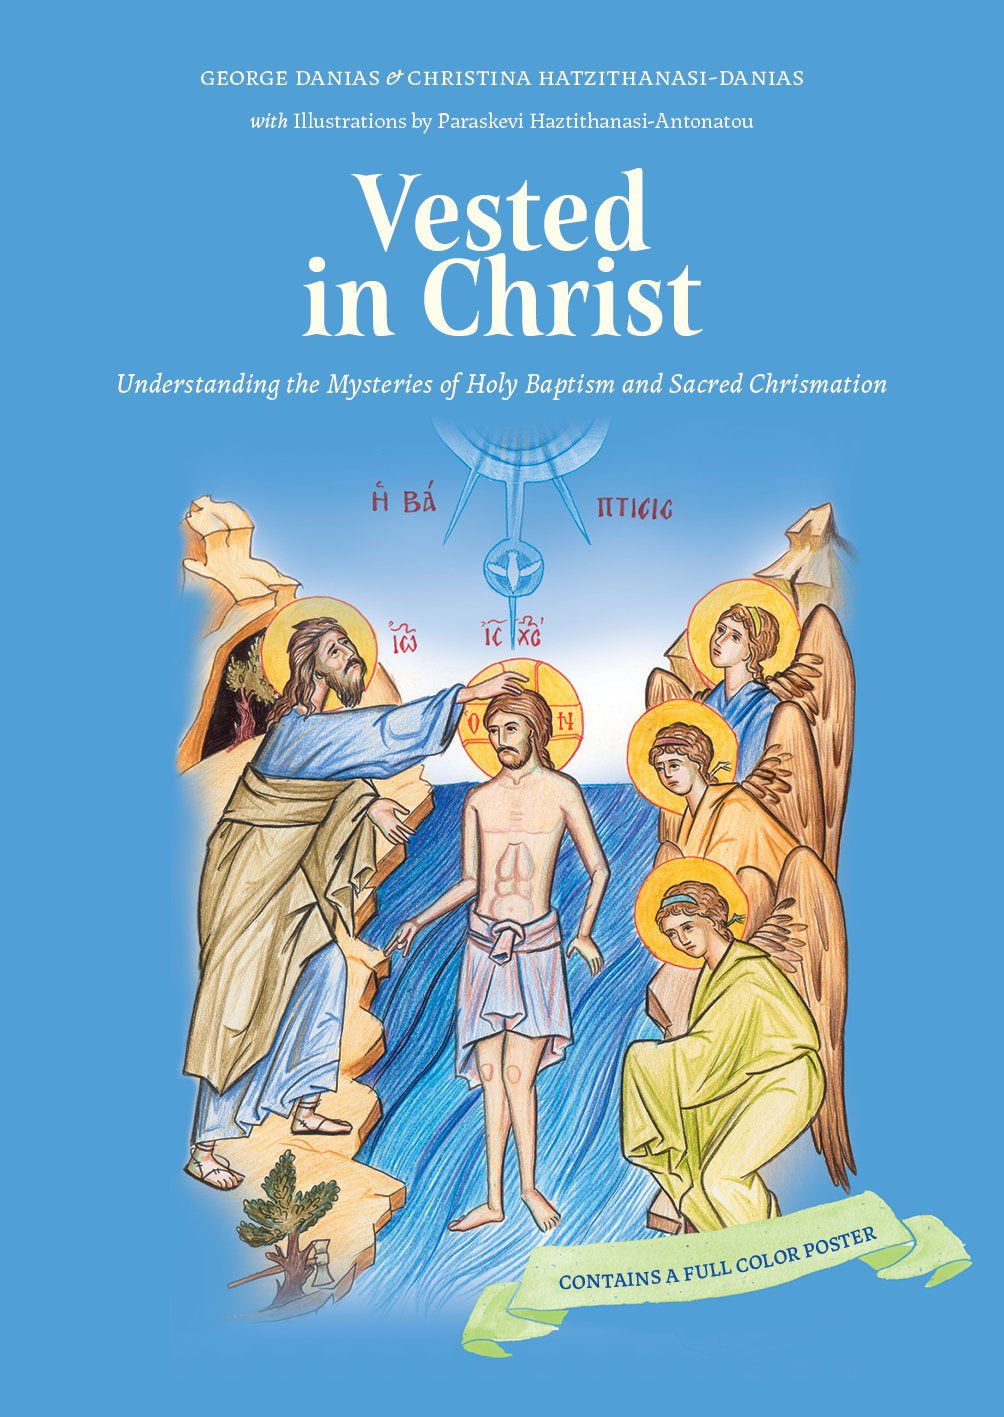 Vested in Christ: Understanding the Mysteries of Holy Baptism and Sacred Chrismation